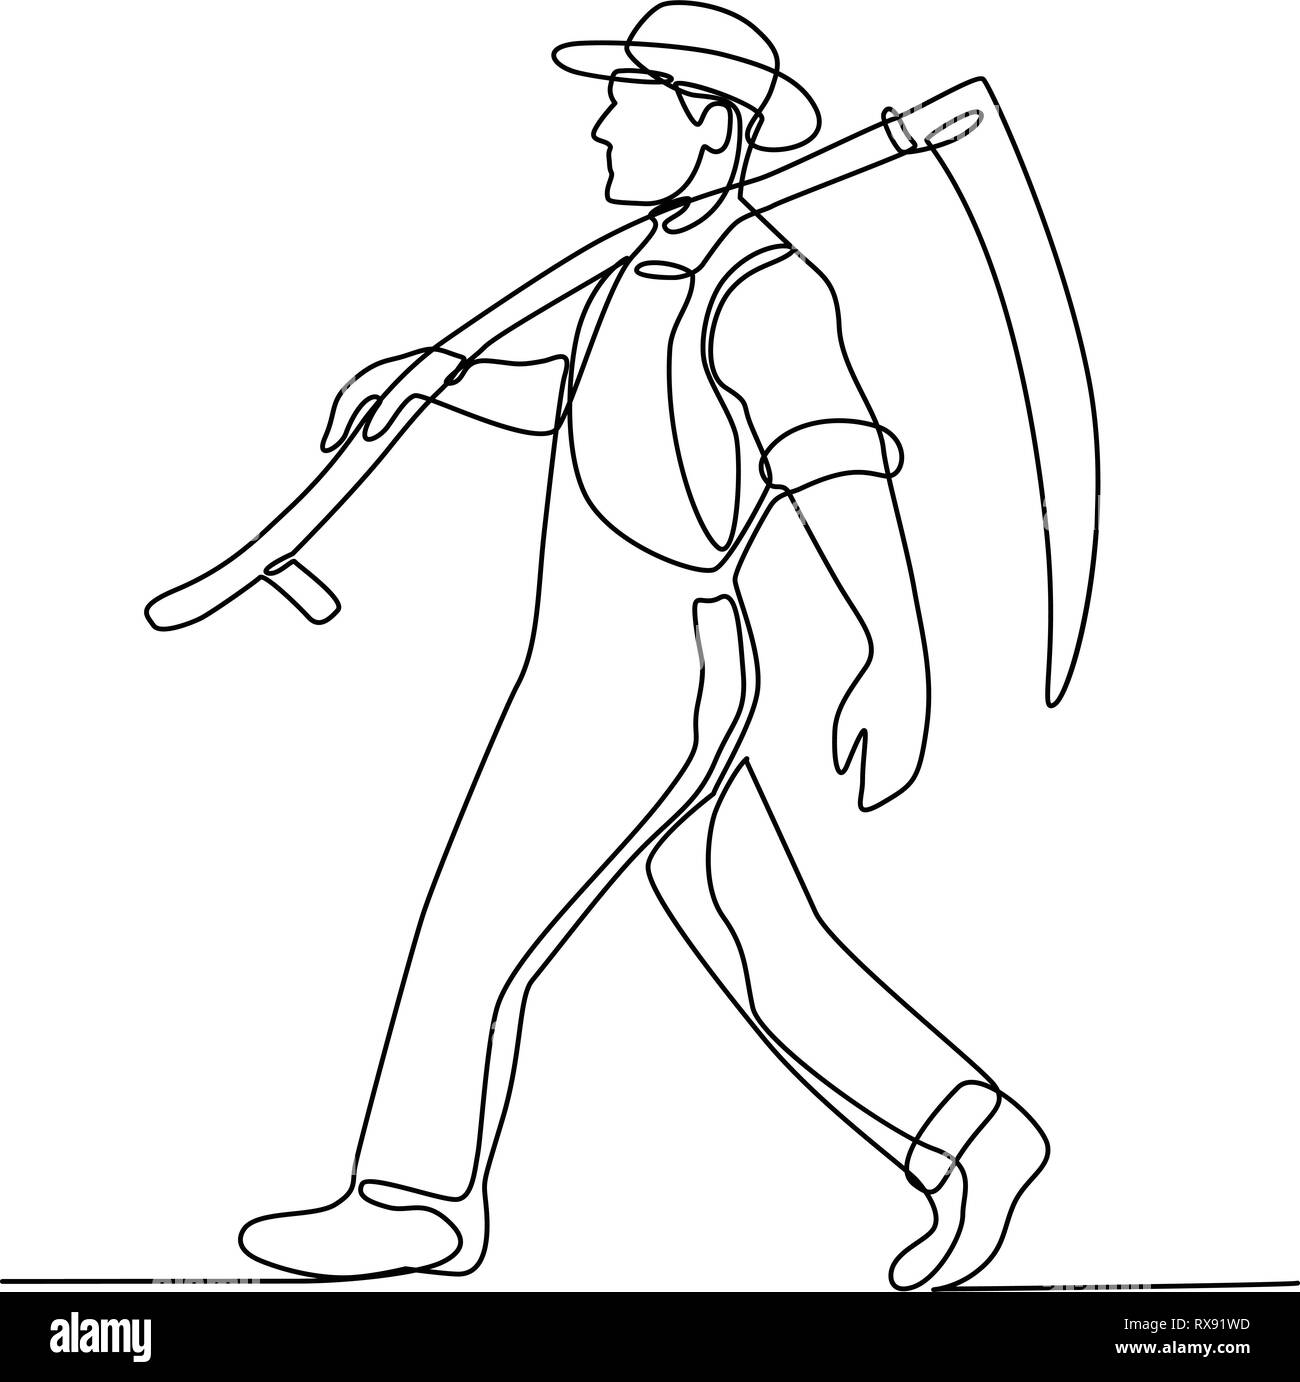 Continuous line illustration of an organic farmer walking carrying a scythe viewed from side done in black and white monoline style. Stock Vector